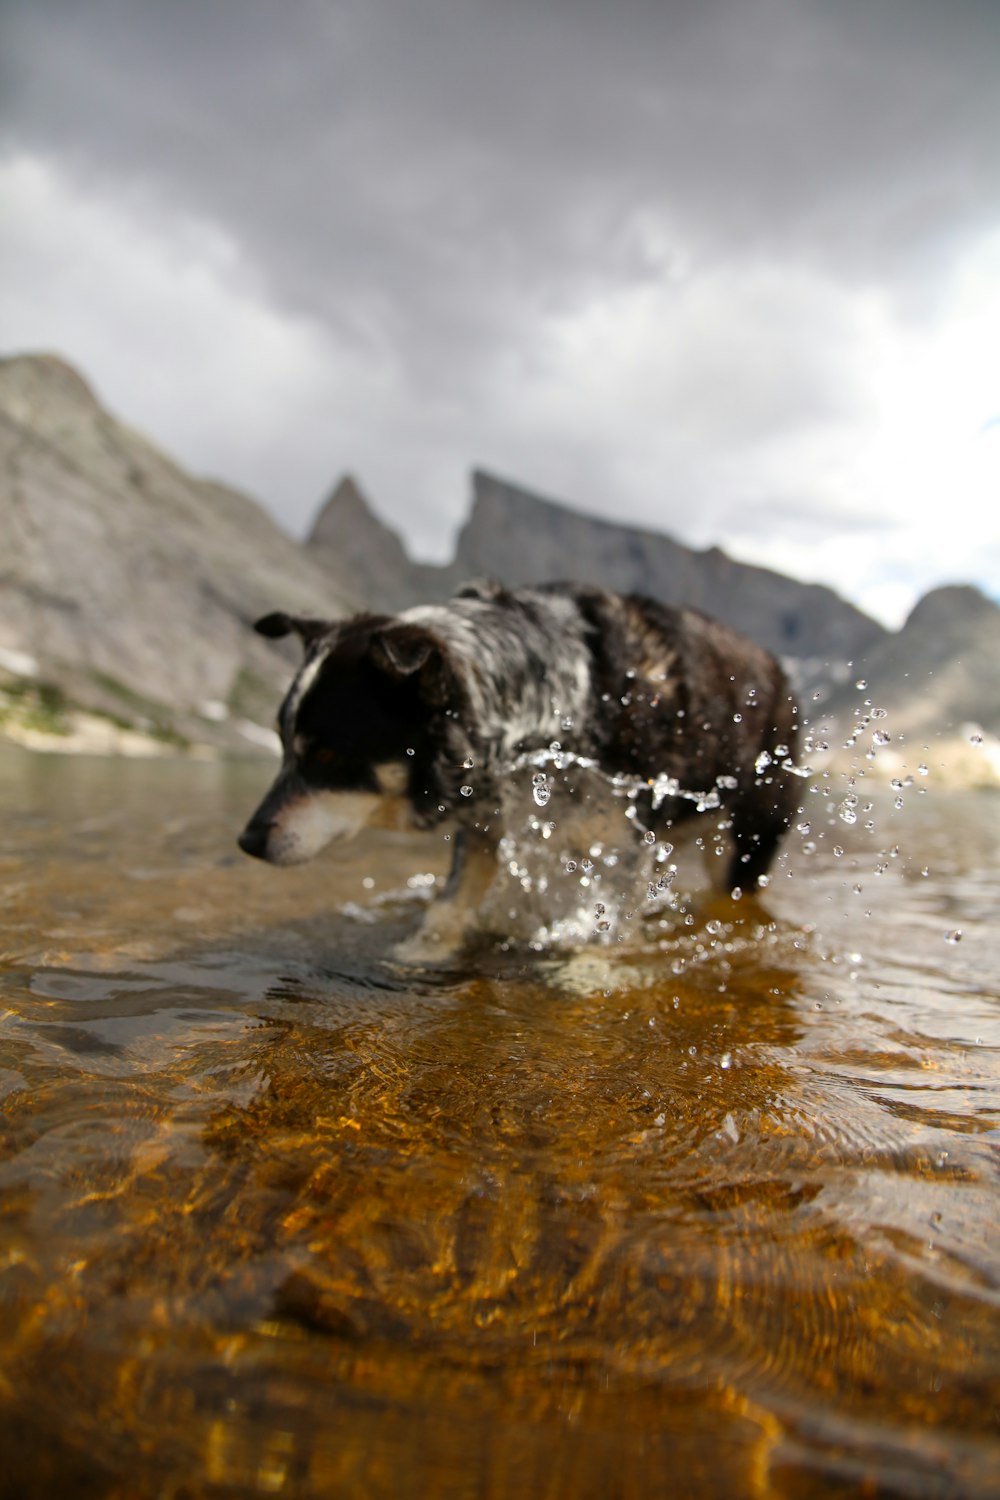 a dog is wading in the shallow water